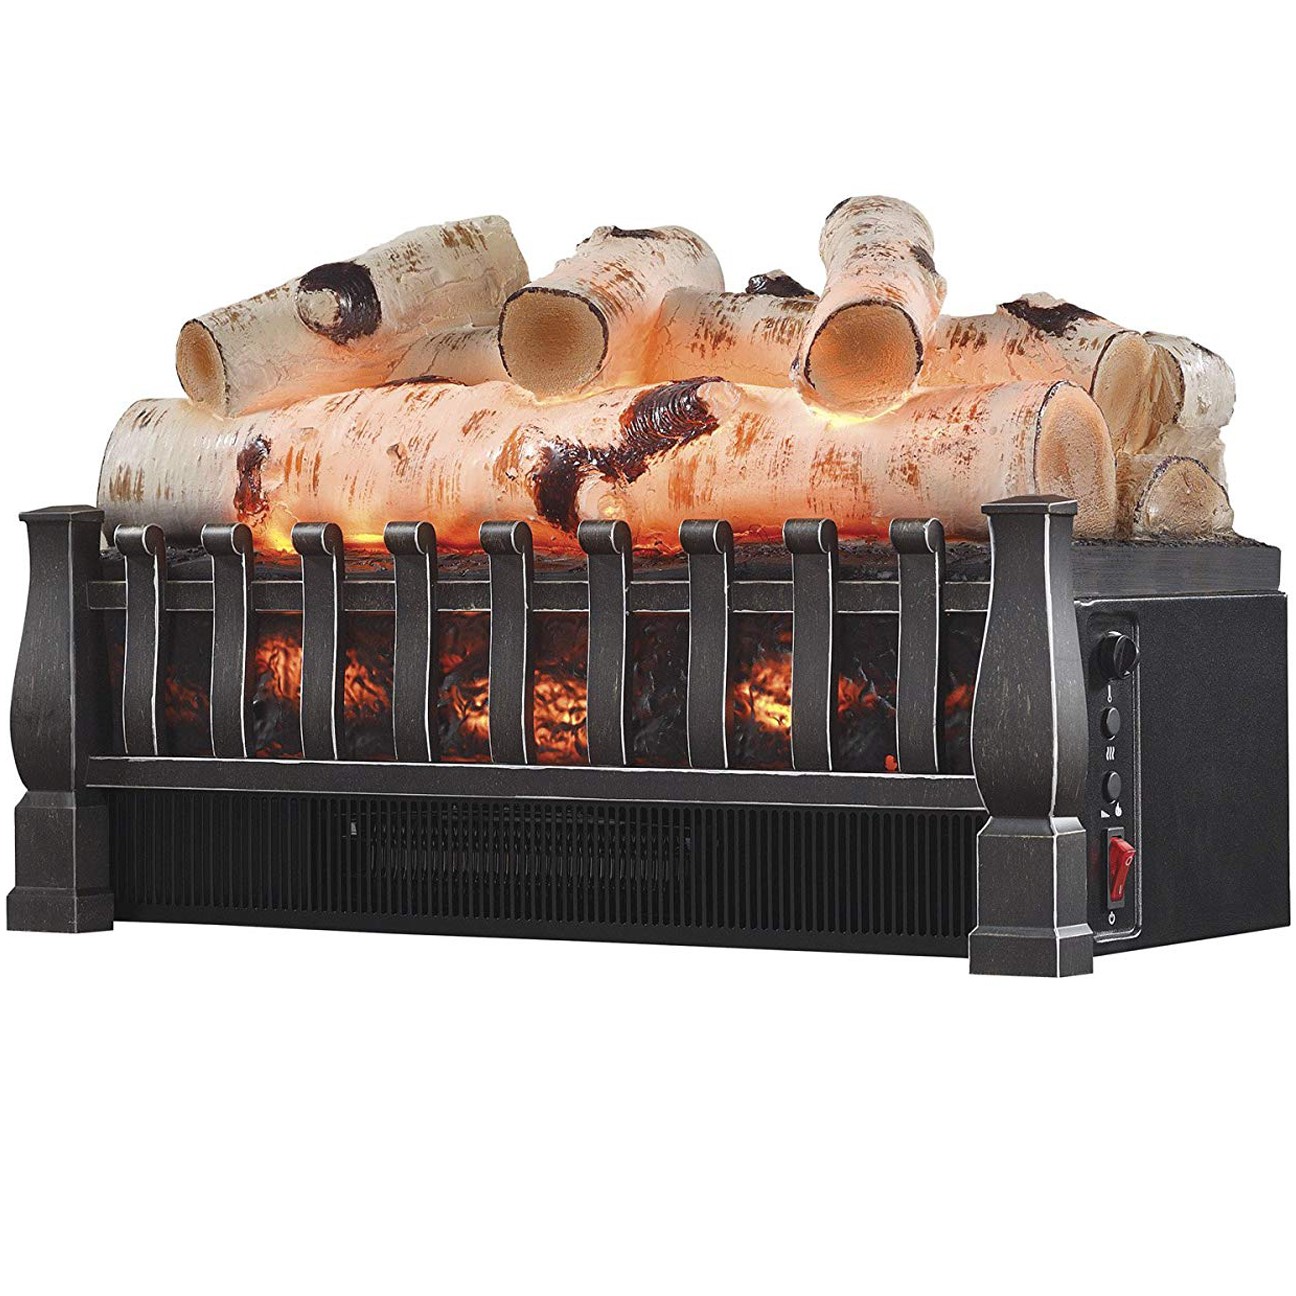 Regal Flame 20 Inch Electric Fireplace Log Realistic Ember Bed Insert with Heater in Oak